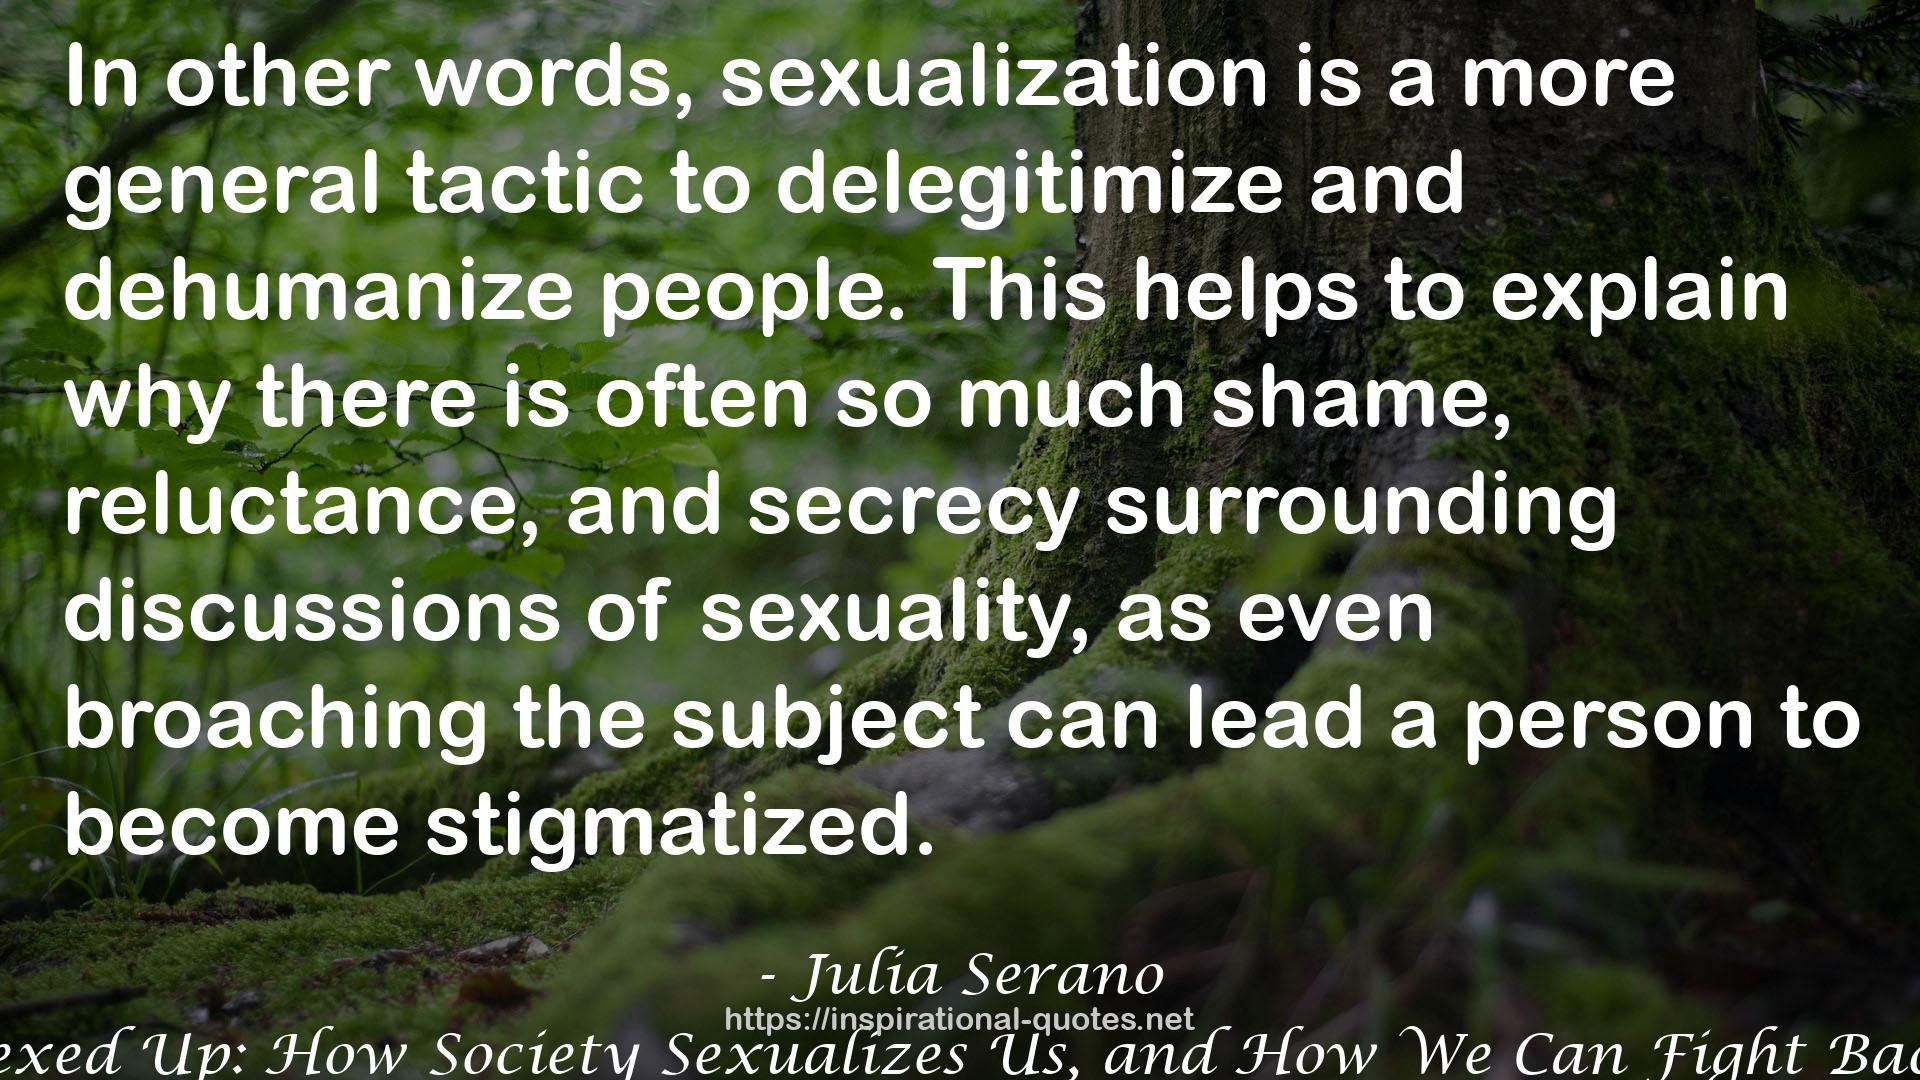 Sexed Up: How Society Sexualizes Us, and How We Can Fight Back QUOTES